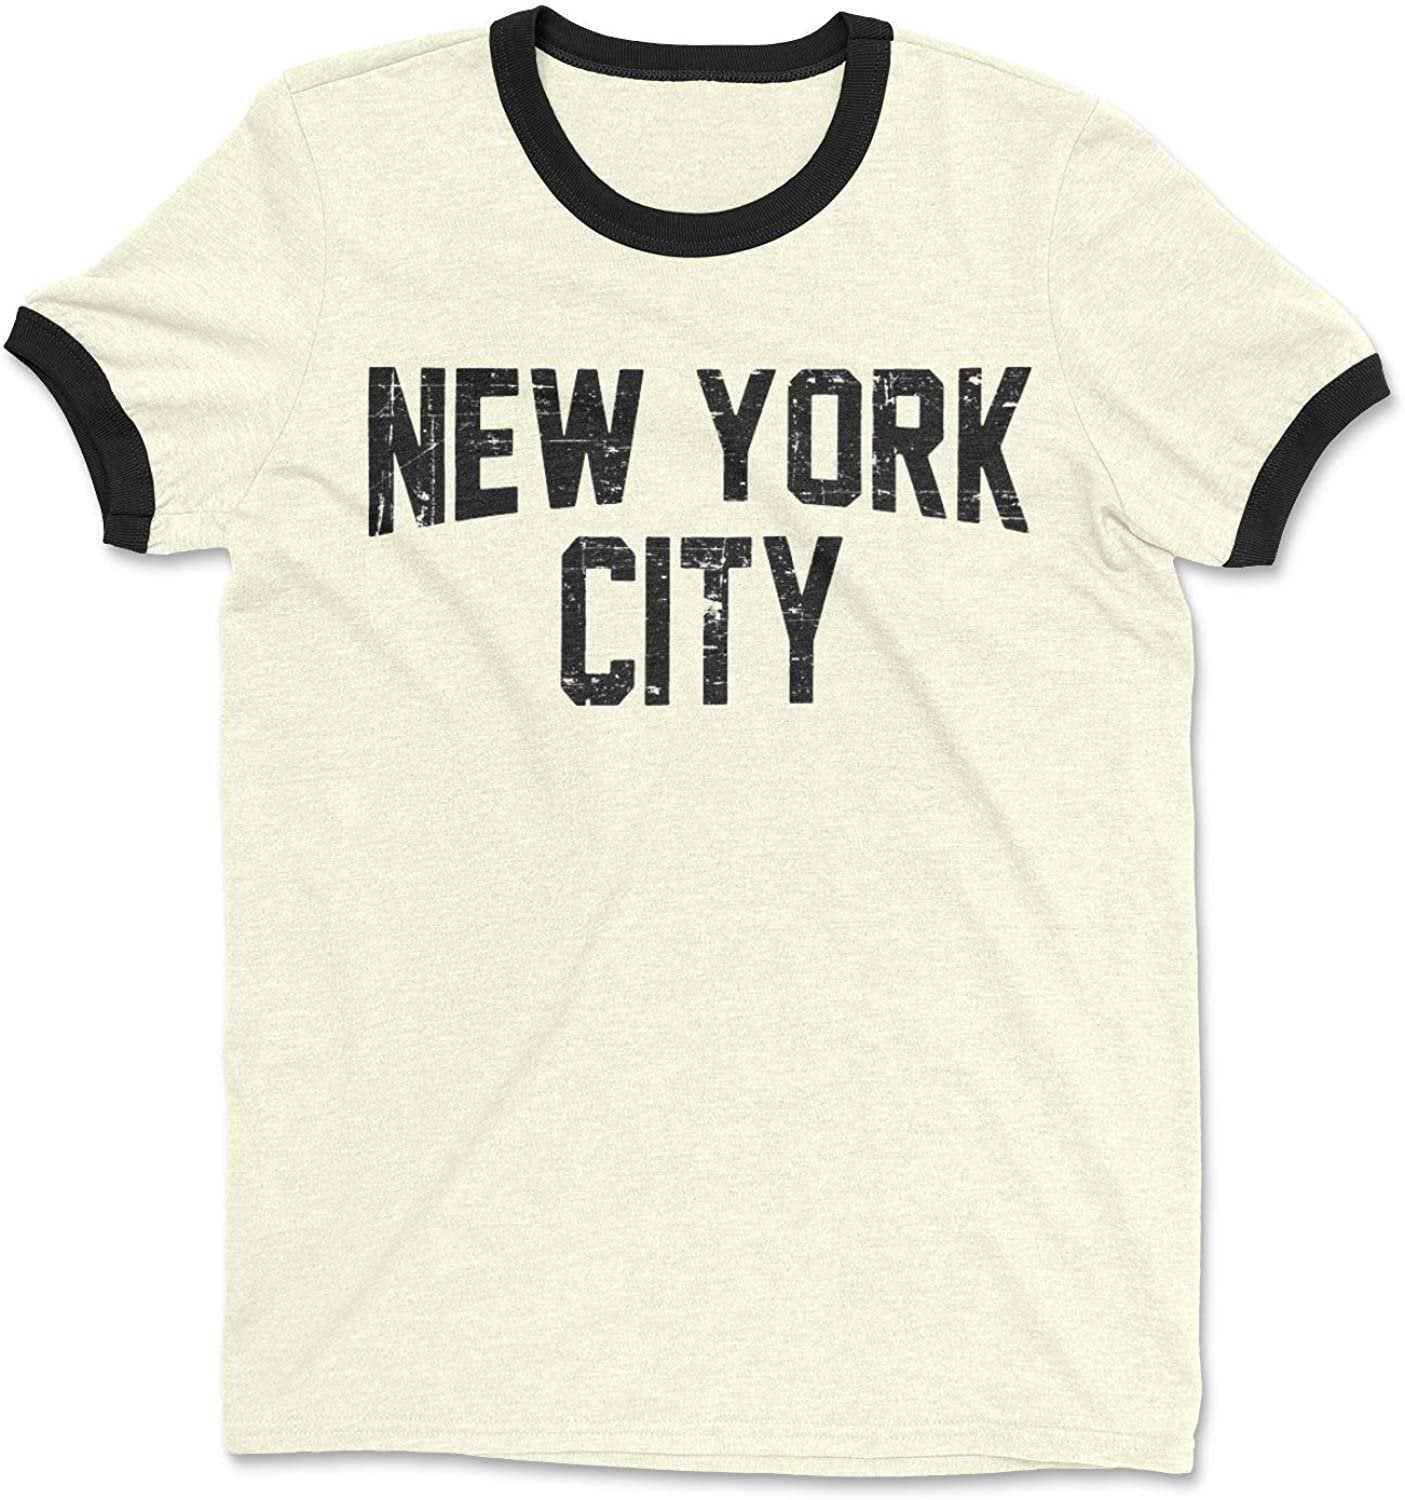 NYC Factory Ringer Tee Natural New York City John Lennon Distressed T-Shirt Retro Natural, 2XL, Adult Unisex, White